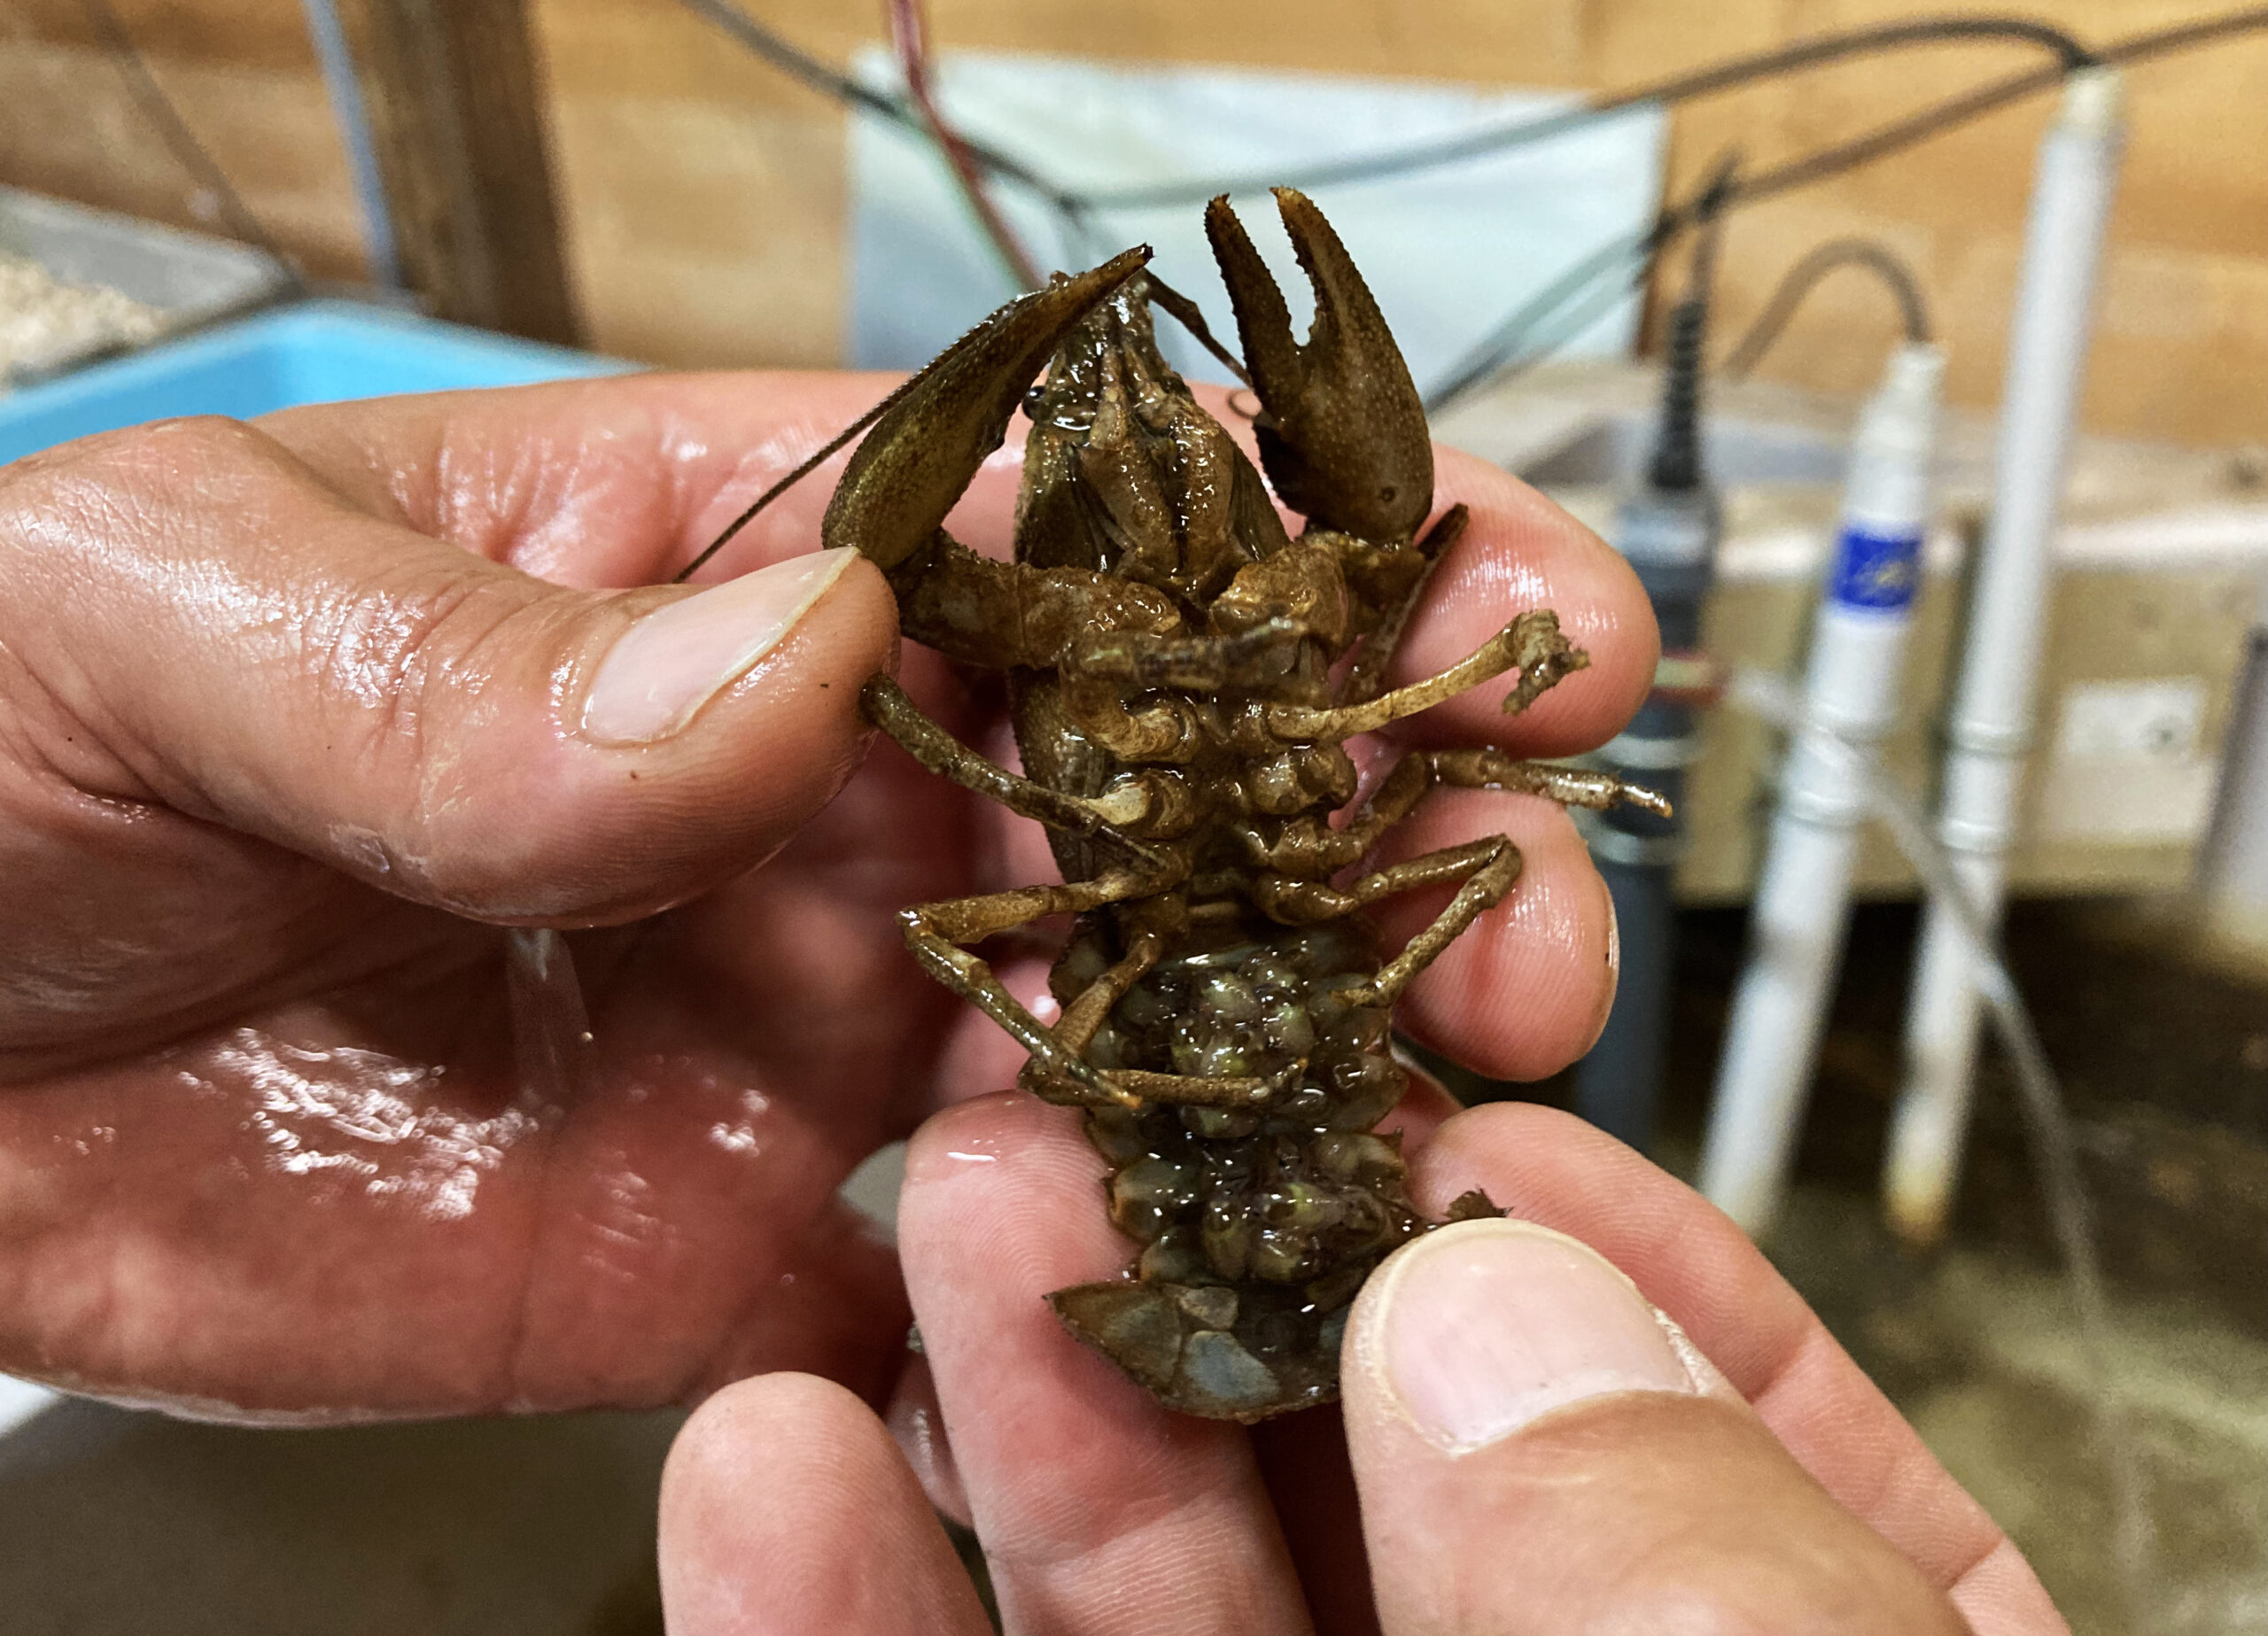 An adult white-clawed crayfish with eggs attached.